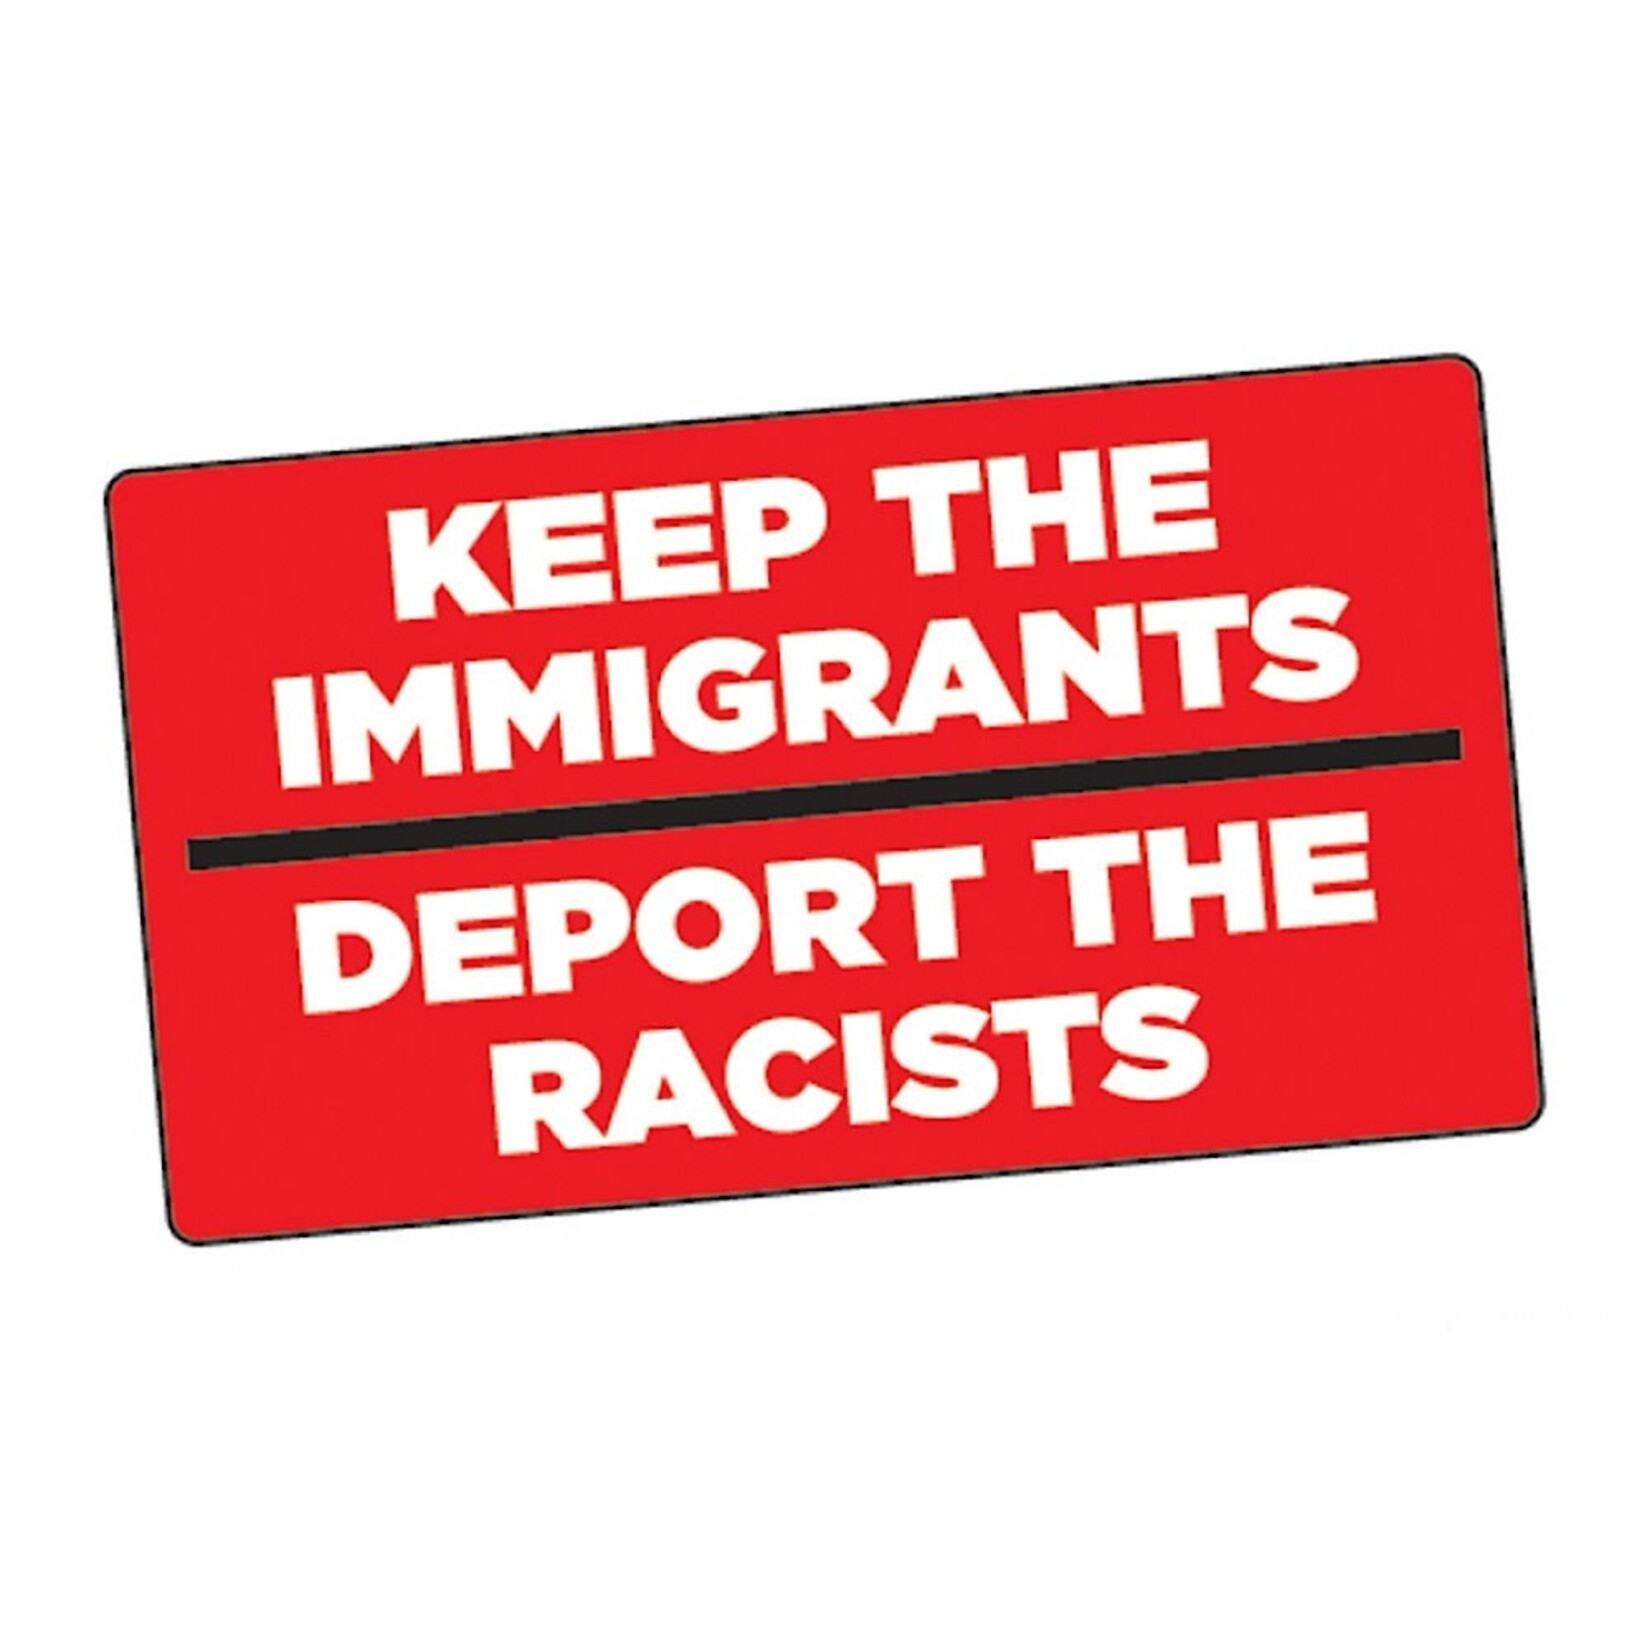 Sticker - Keep the immigrants deport the racists